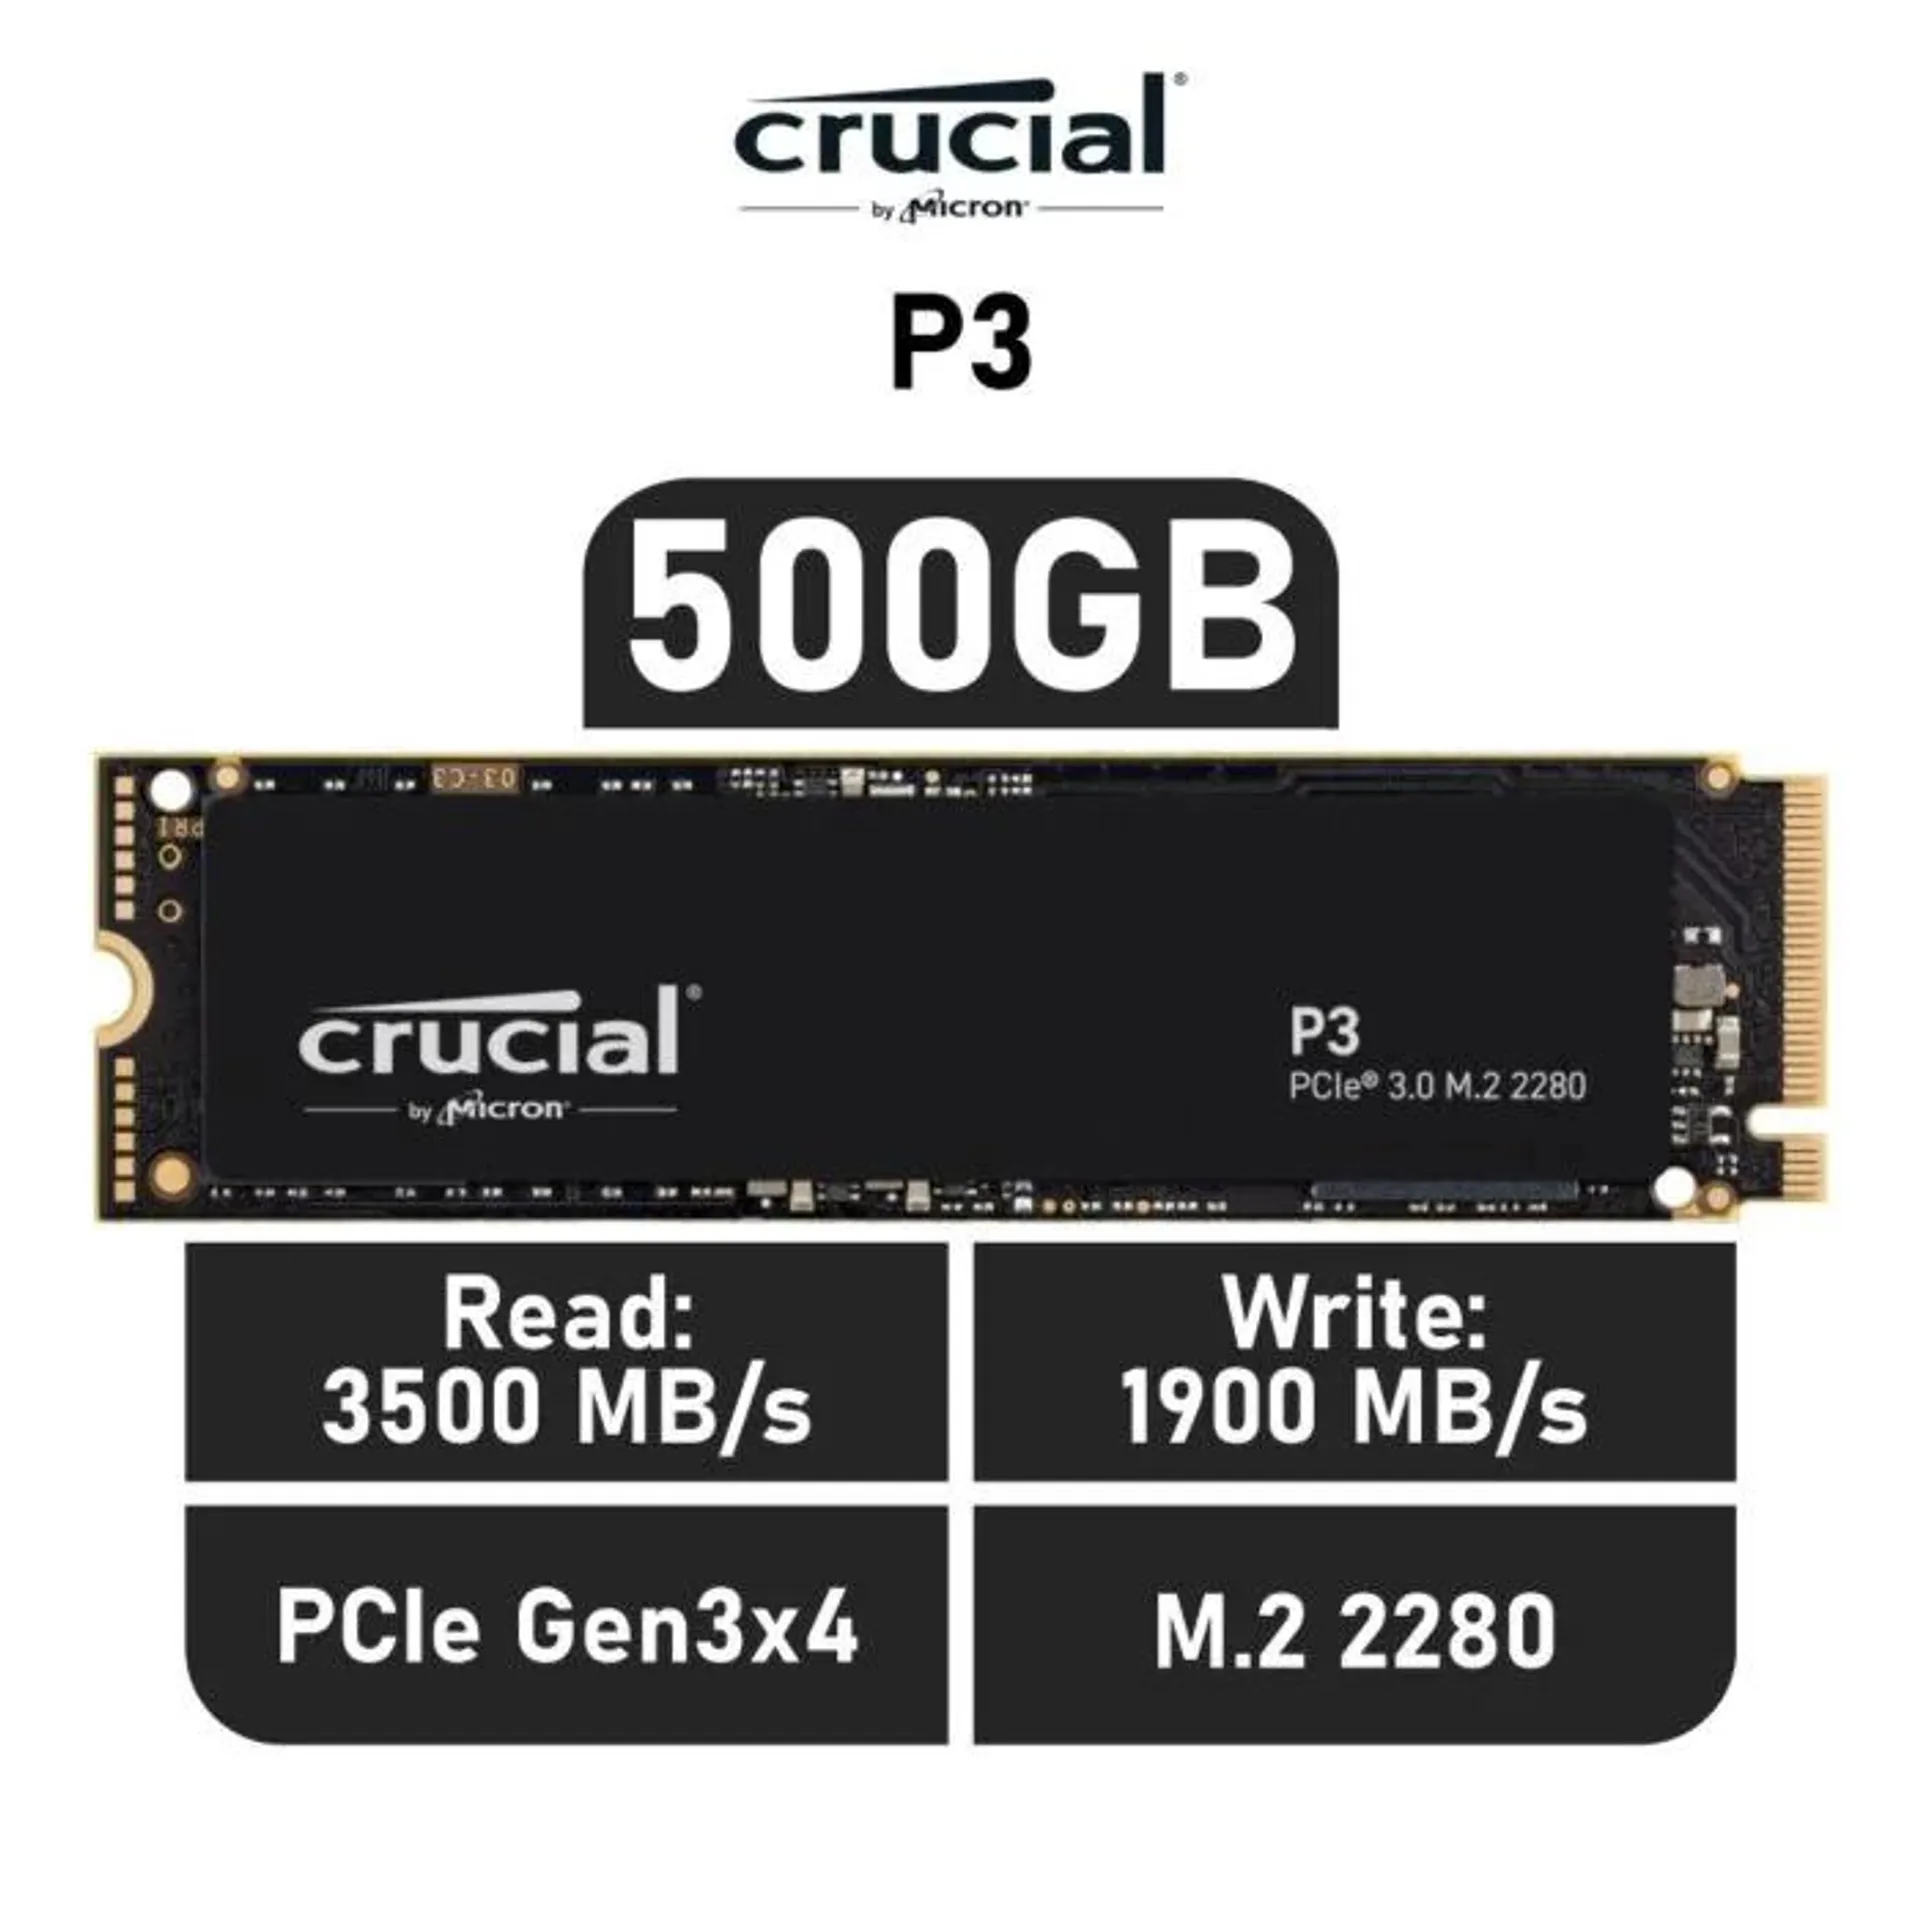 Crucial P3 500GB PCIe Gen3x4 CT500P3SSD8 M.2 2280 Solid State Drive